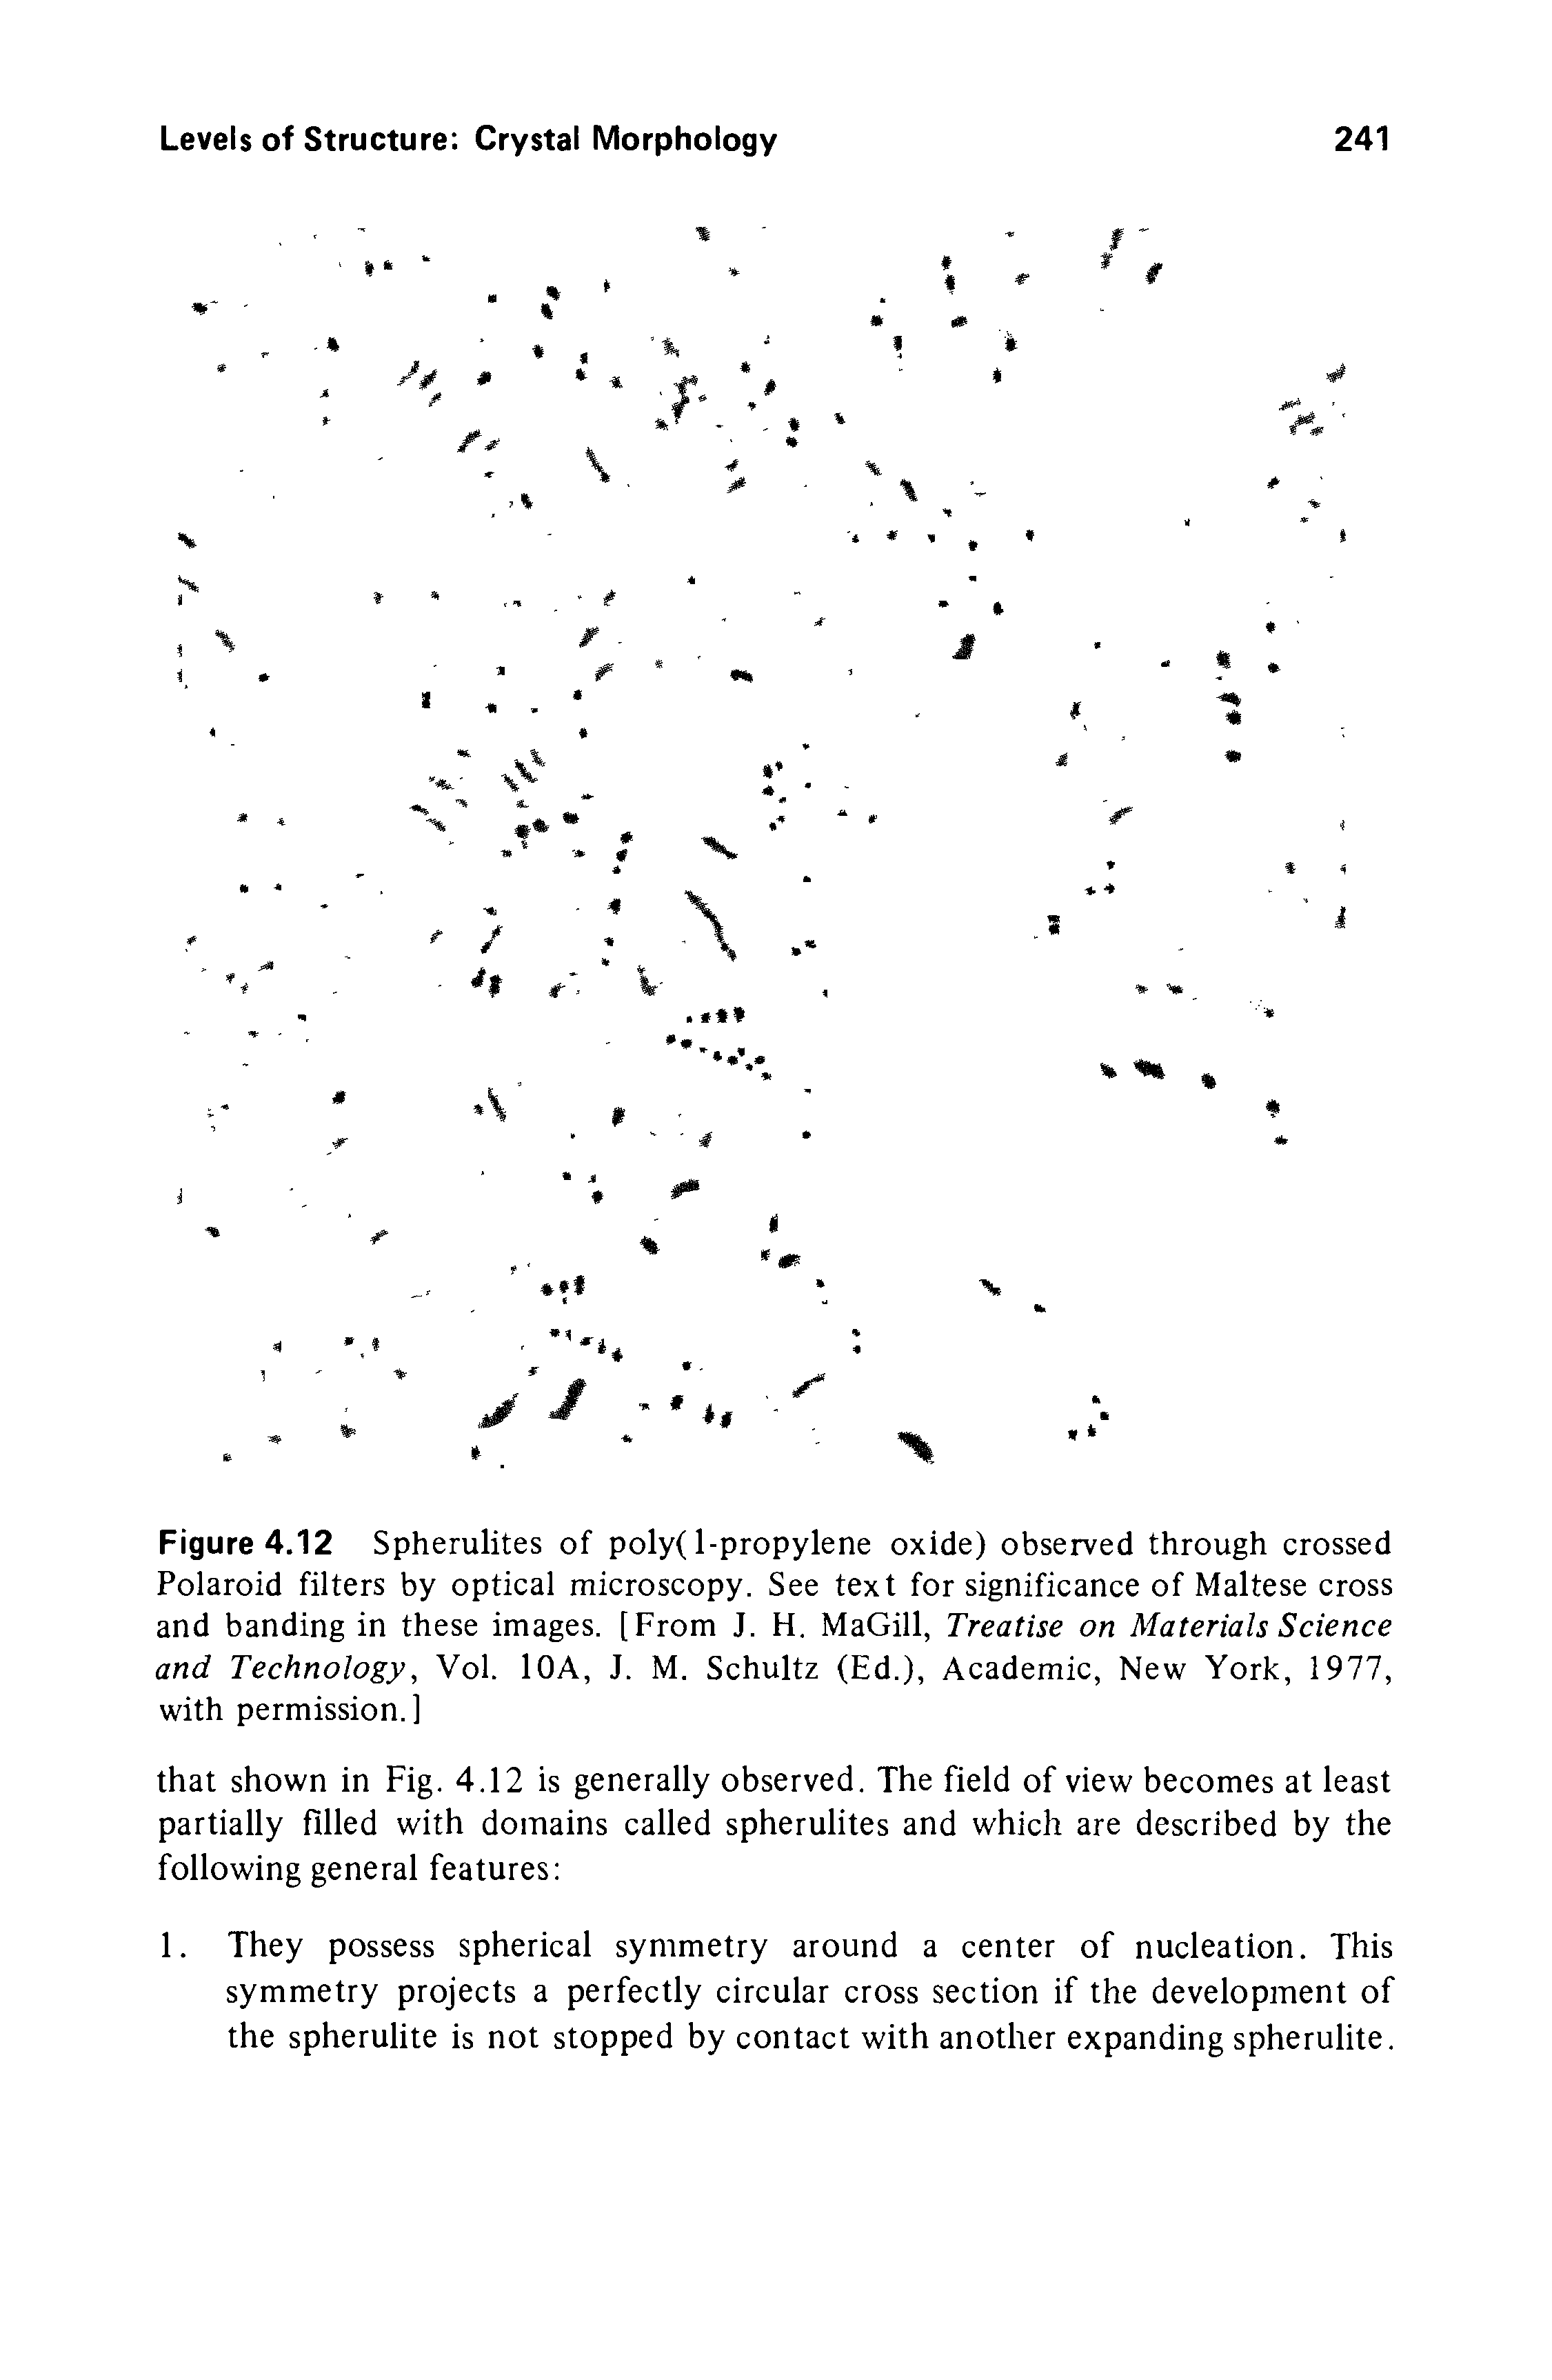 Figure 4.12 Spherulites of poly( 1-propylene oxide) observed through crossed Polaroid filters by optical microscopy. See text for significance of Maltese cross and banding in these images. [From J. H. MaGill, Treatise on Materials Science and Technology, Vol. lOA, J. M. Schultz (Ed.), Academic, New York, 1977, with permission.]...